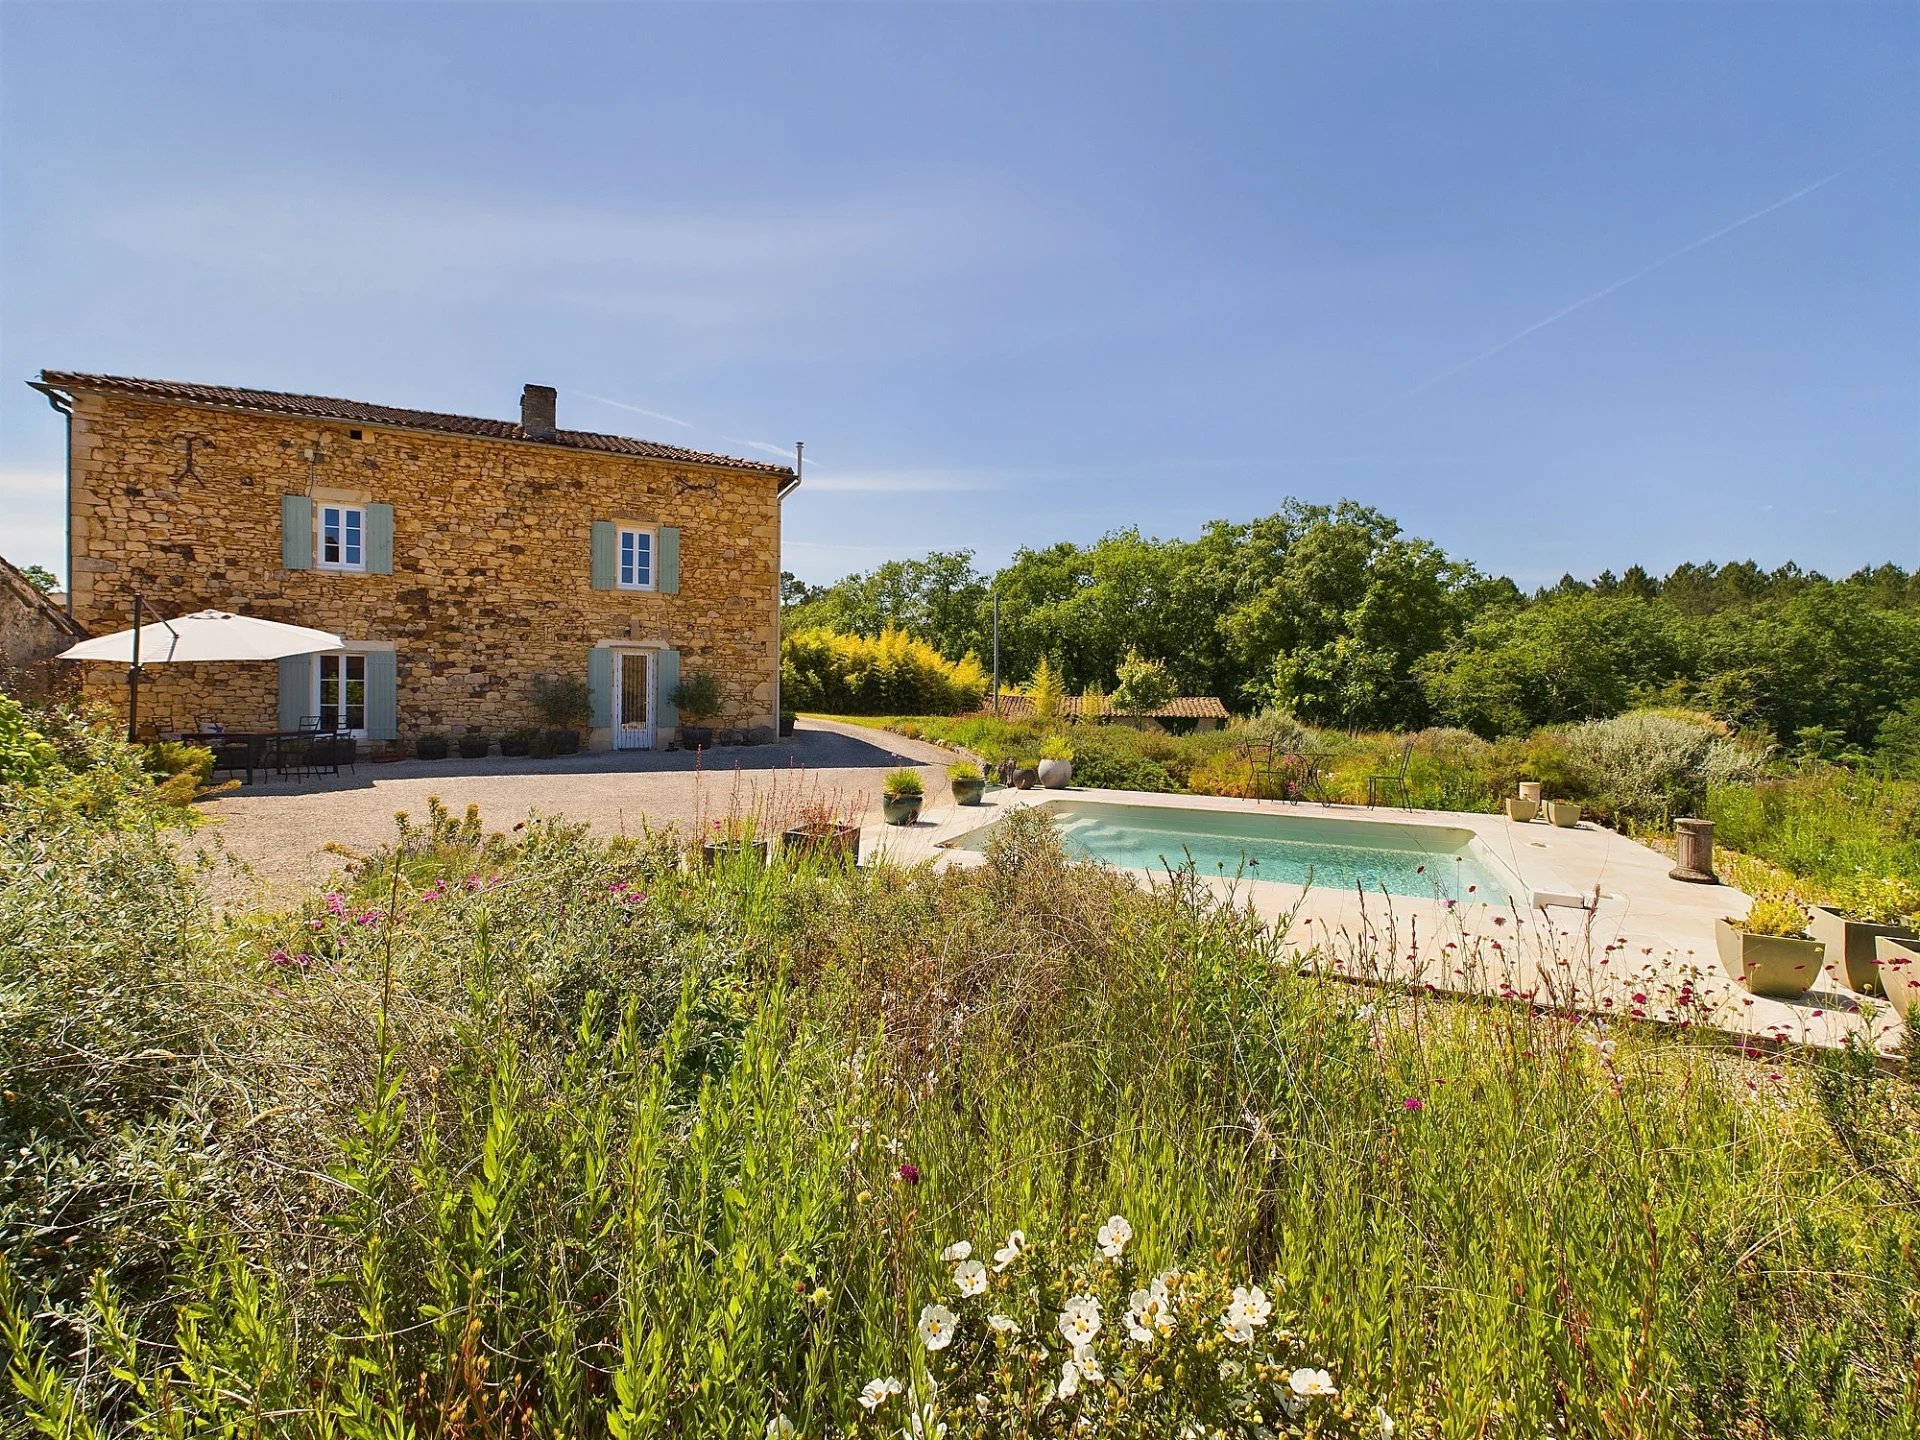 Stunning 3 Bedroom farmhouse with outbuildings and 9 hectares of unspoilt nature